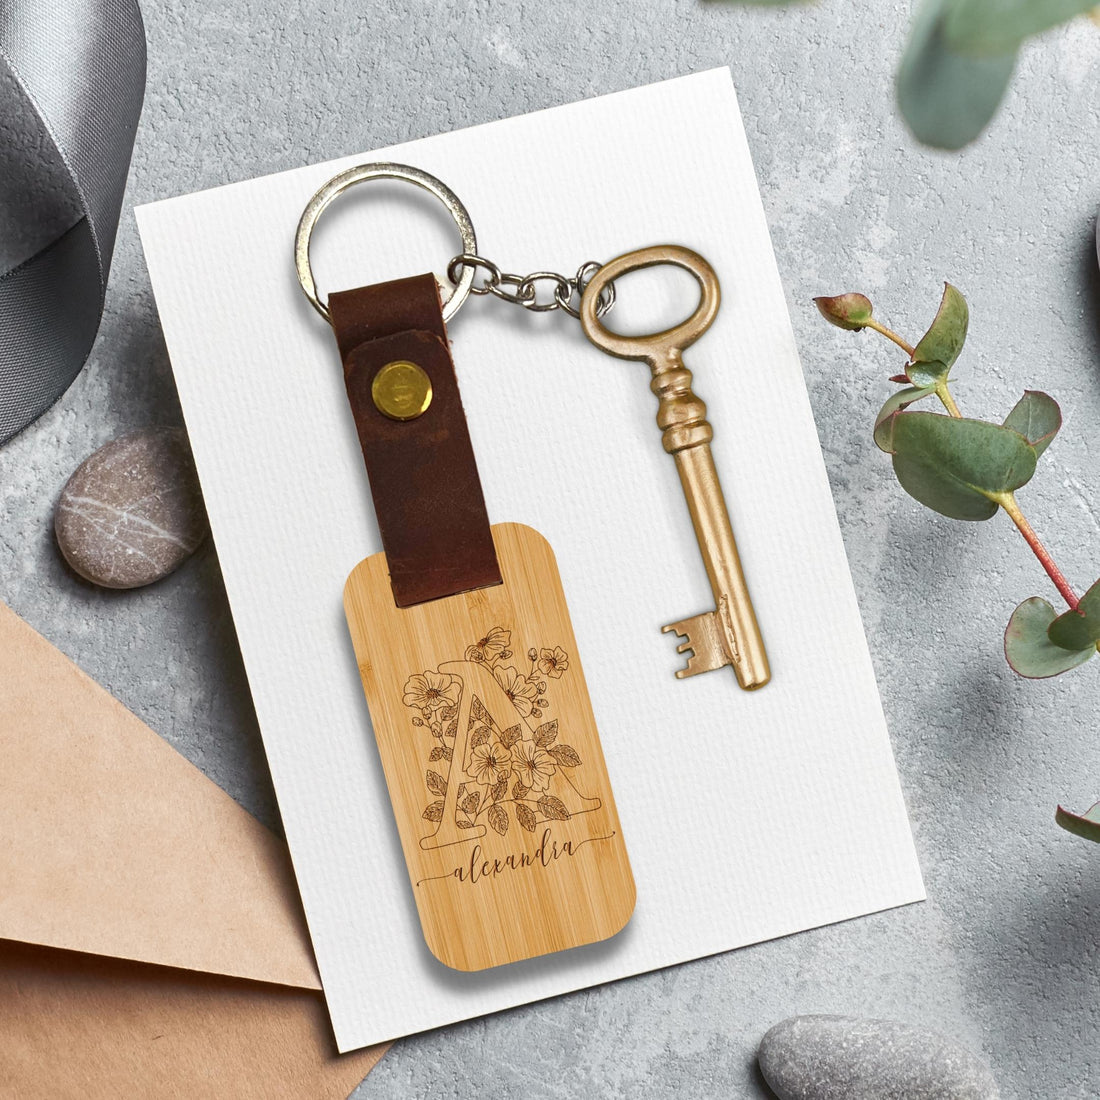 Personalised Wooden Keychain, Custom Wood Key Chain, Logo Engraved Leather Key Ring Tags, Drive Safe Keyrings Gift For Him, Dad/ Corporate, Wedding Favours